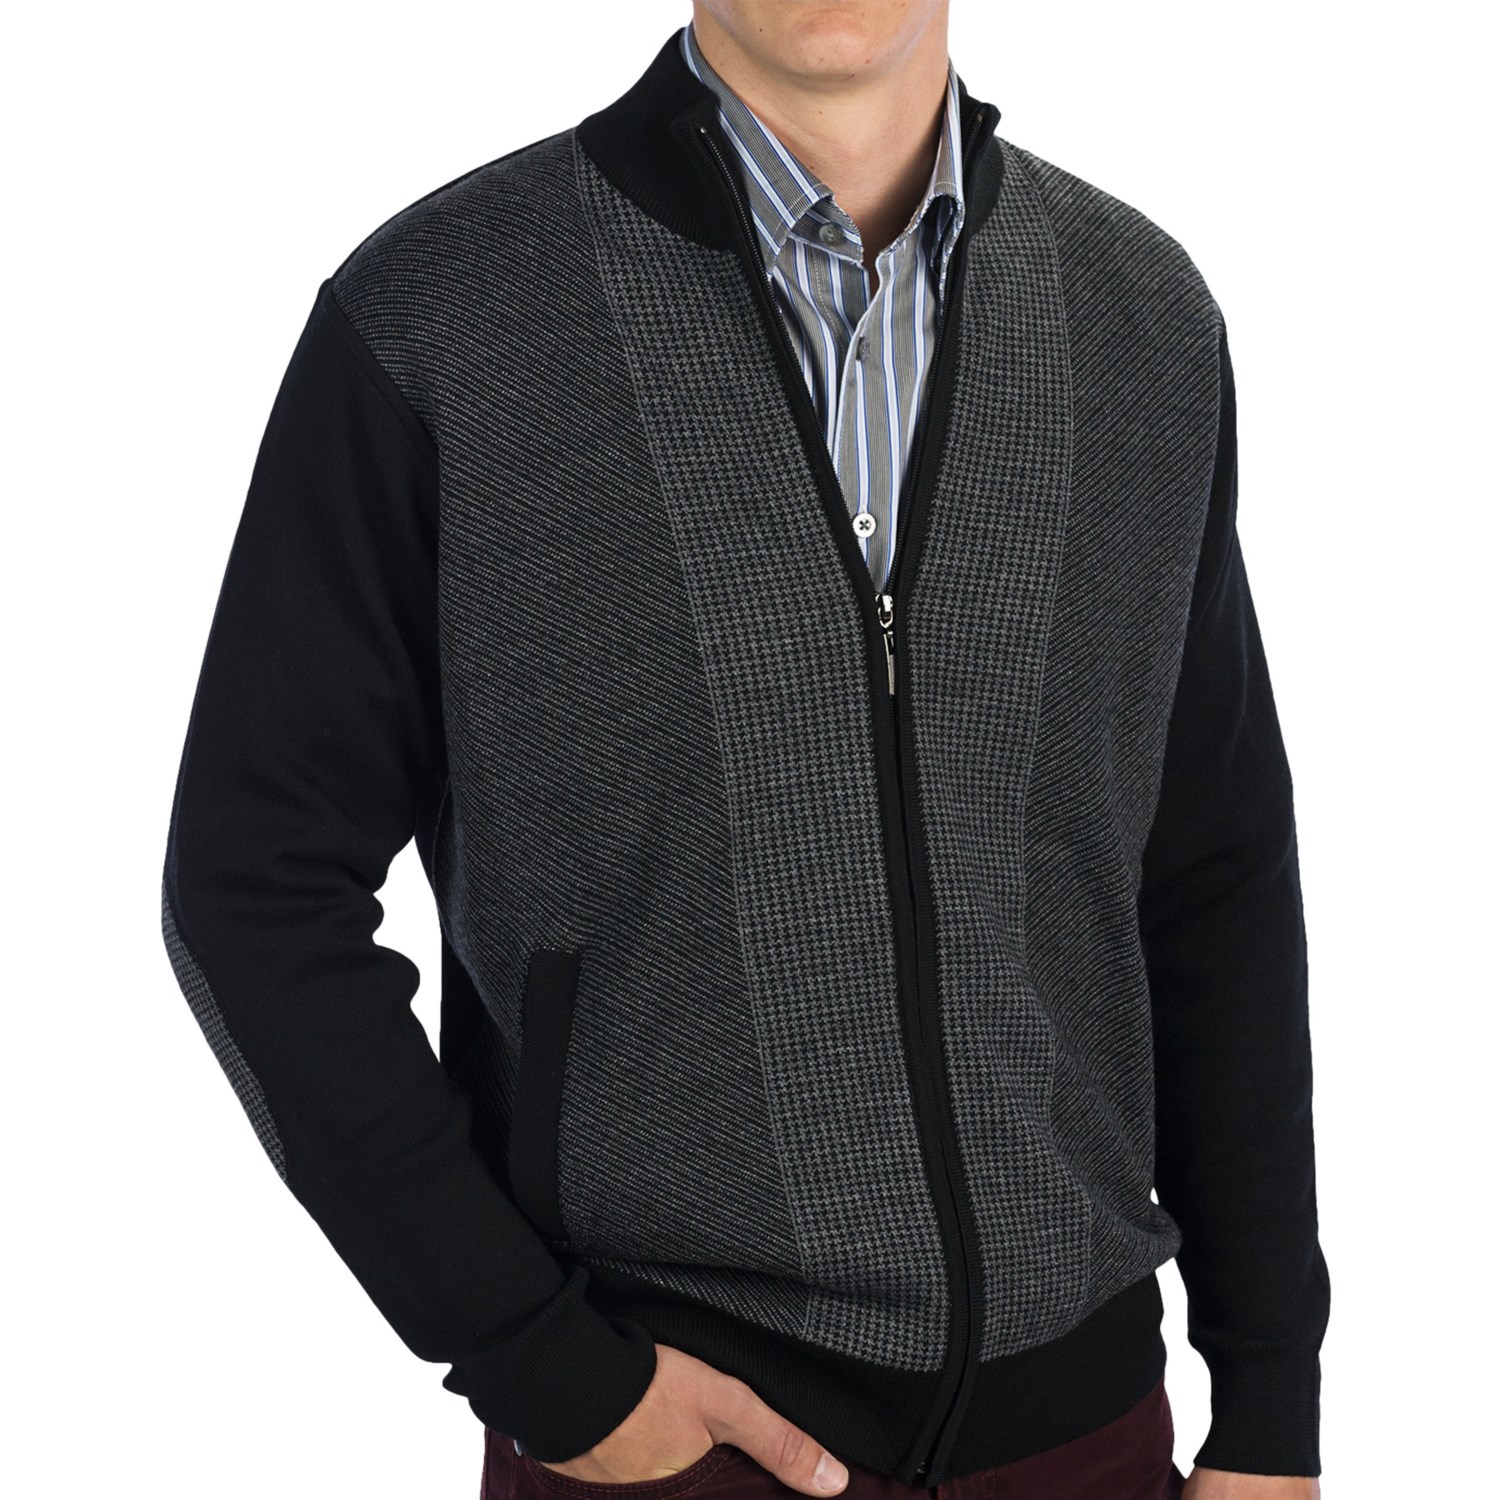 Men'S Crdigan Sweater With Zipper Front - Cardigan With Buttons